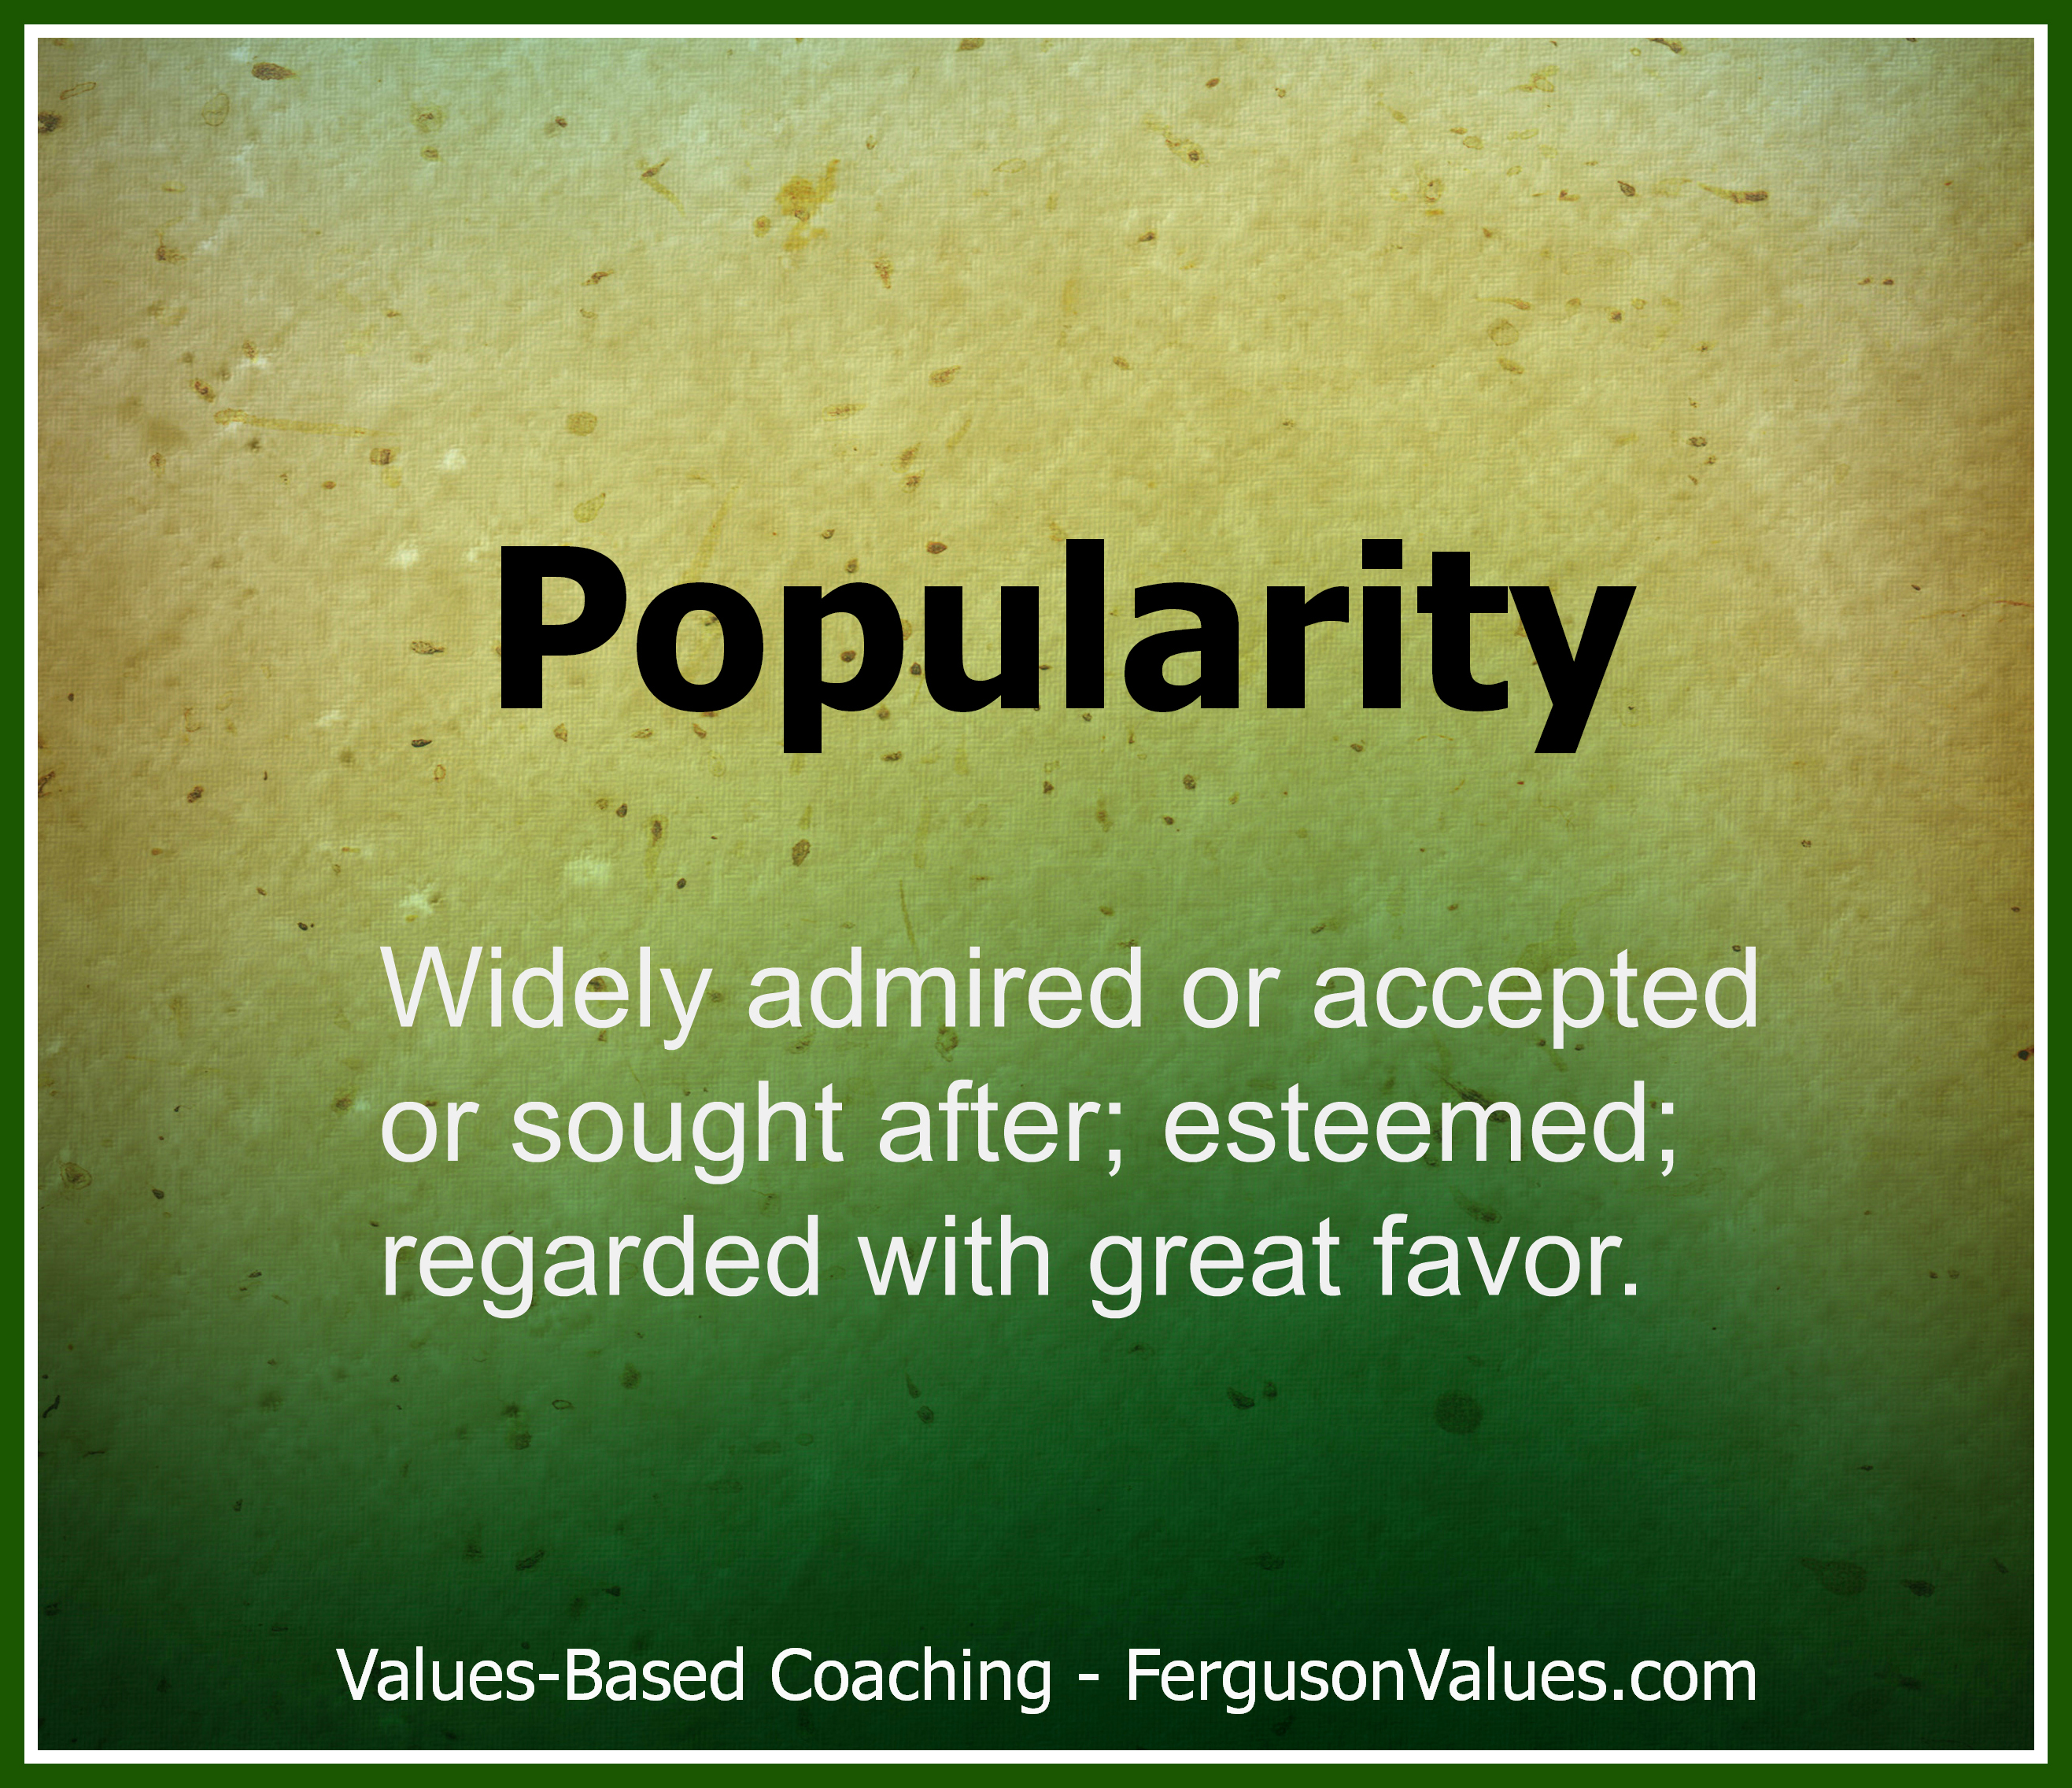 Popularity widely admired or accepted or sought after; esteemed; regarded with great favor